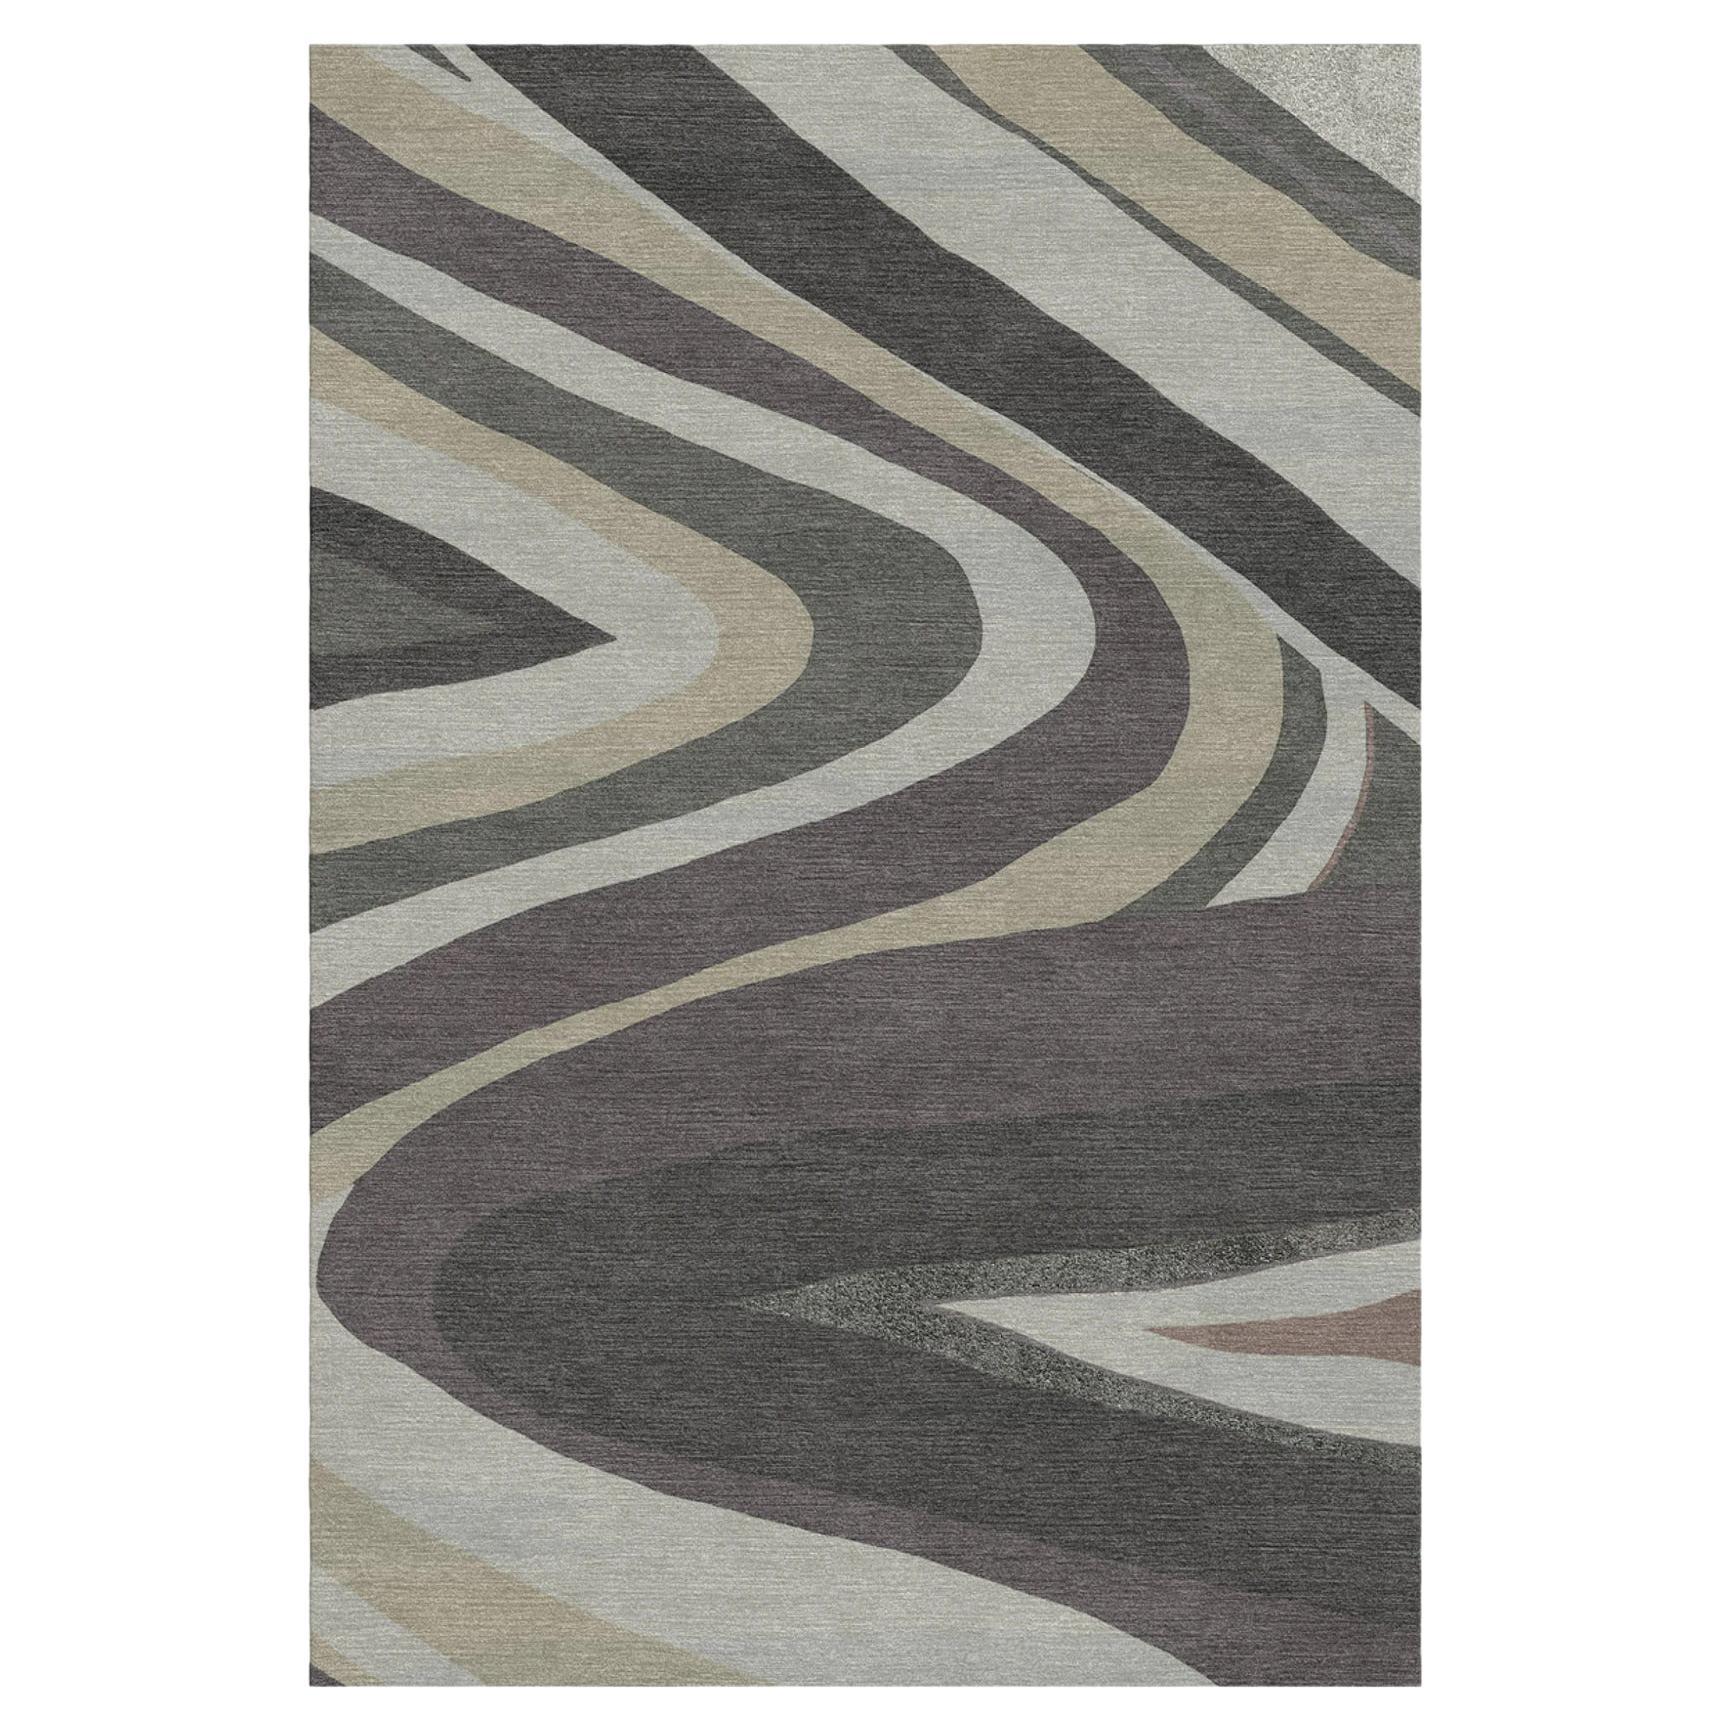 Pietra Hand-Tufted Taupe Rug by Giulio Brambilla For Sale